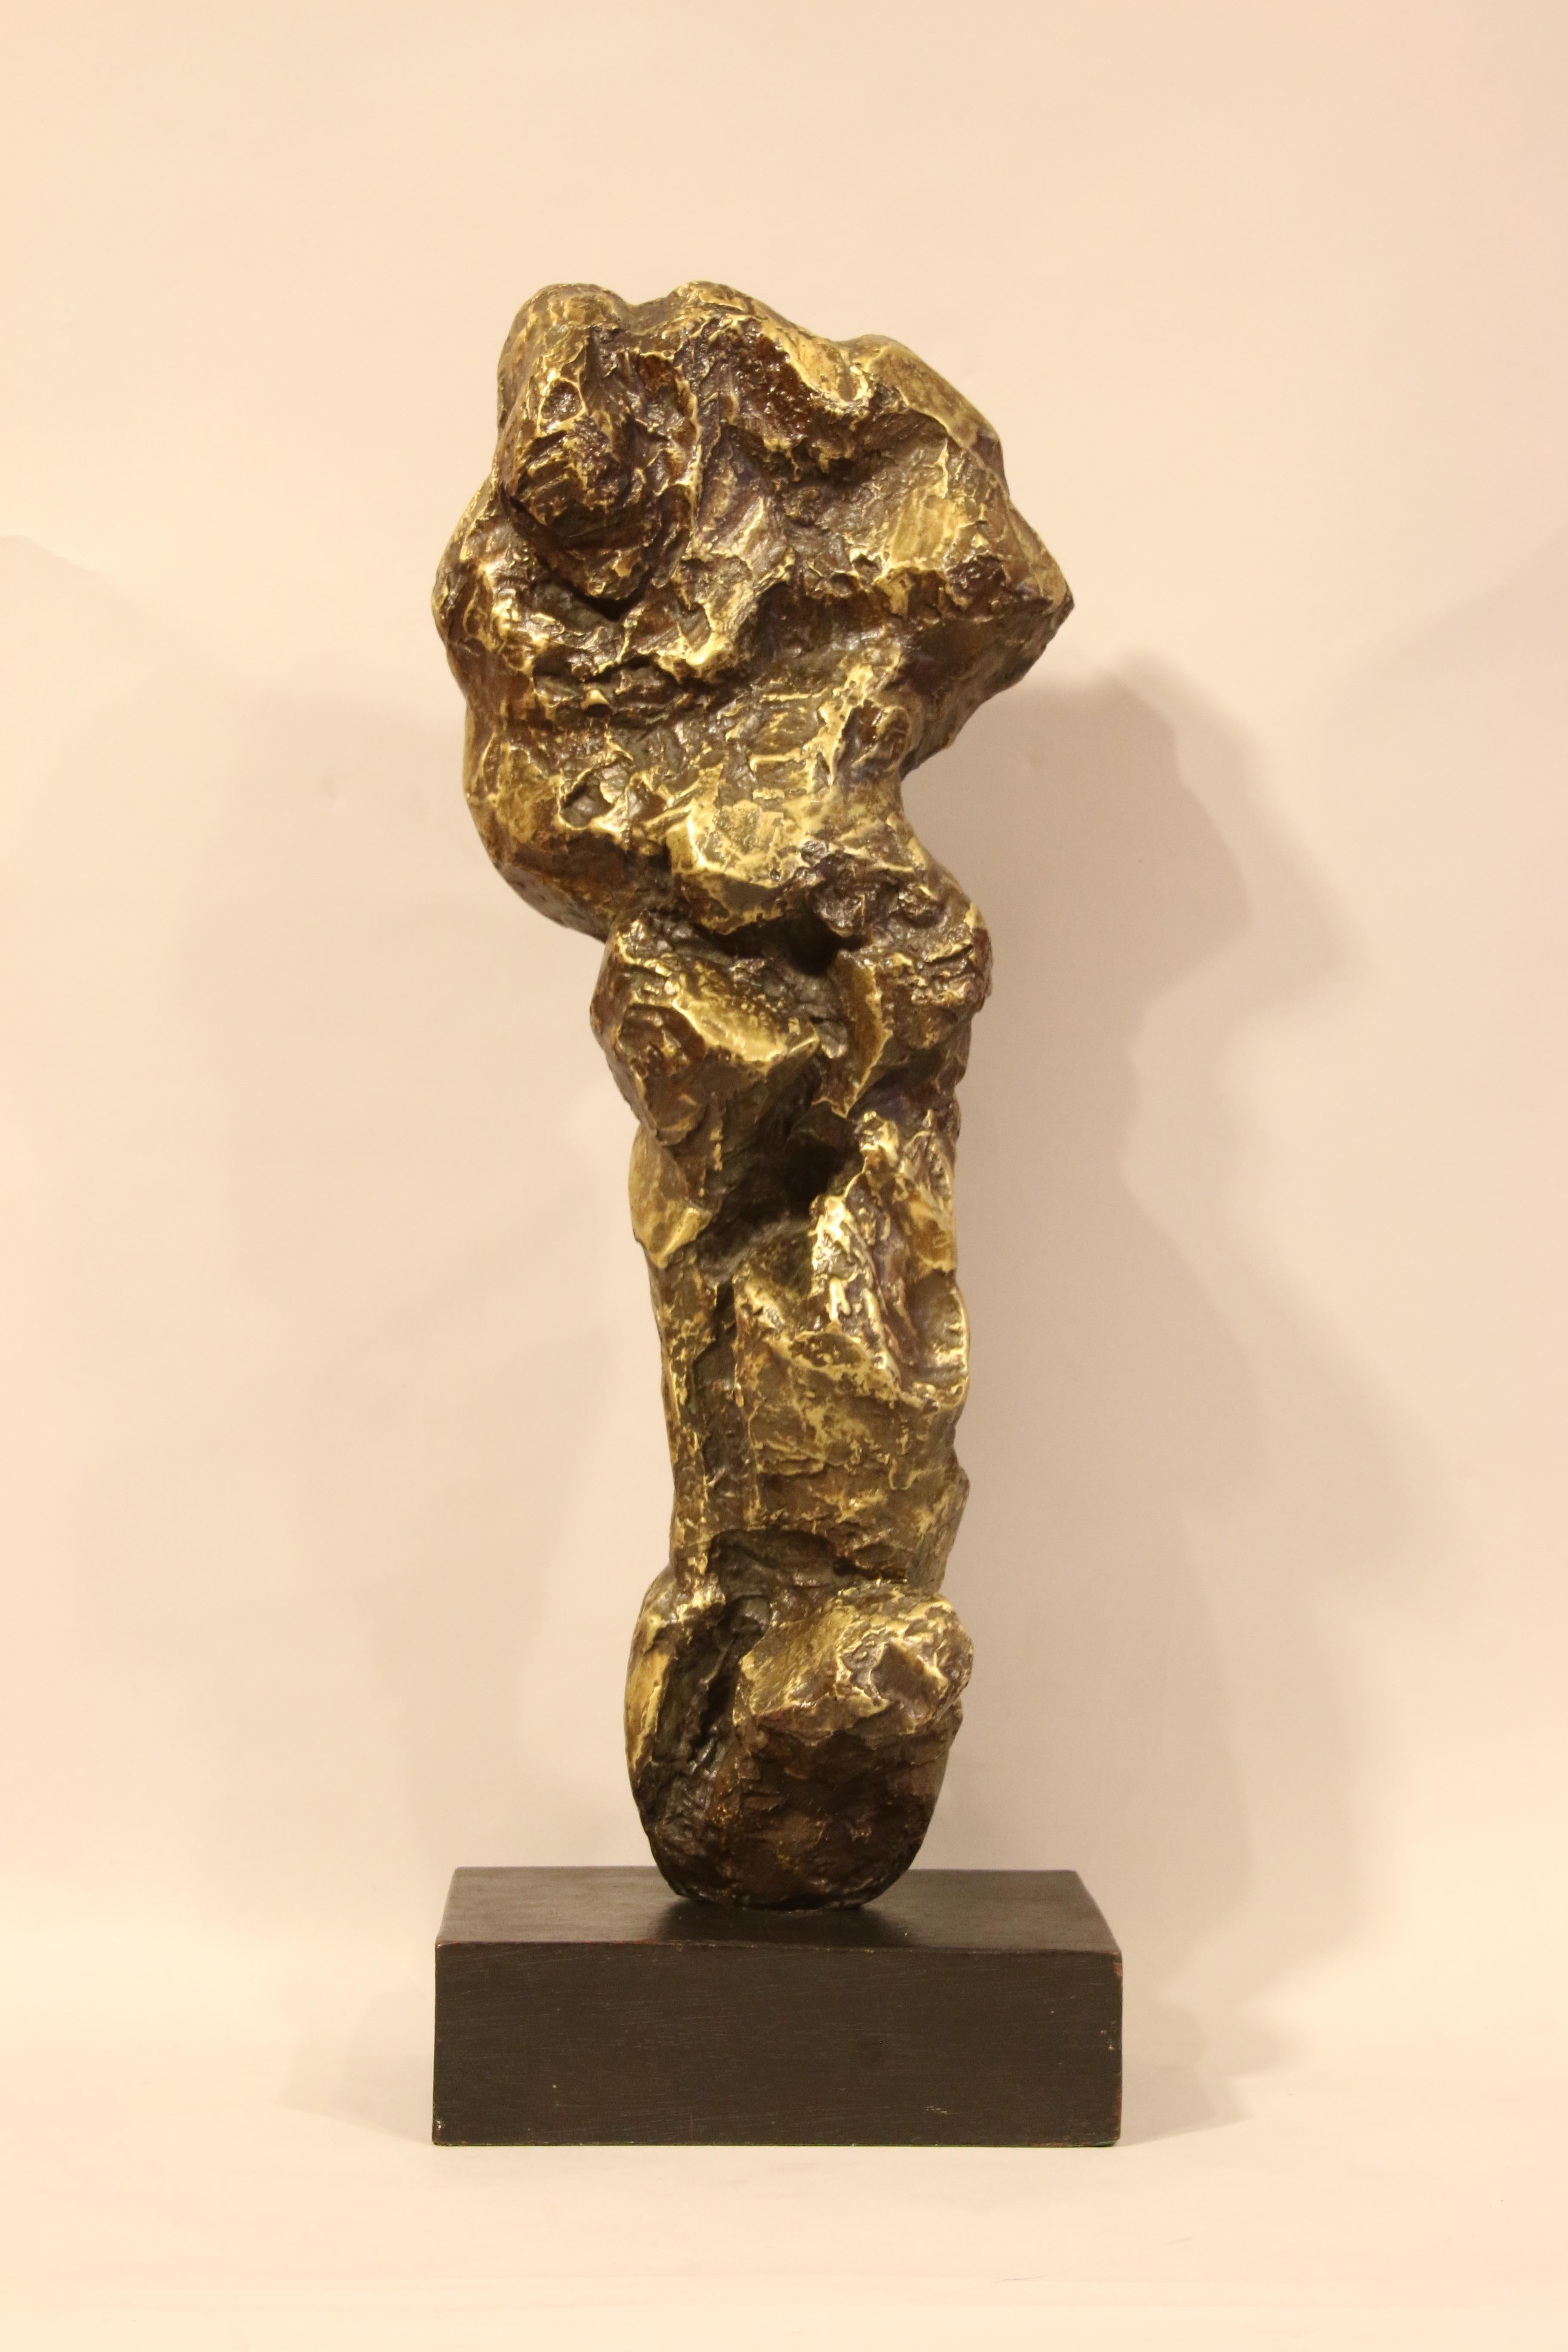 Gérard Koch (1926, Kaiserslautern – 2014, Paris).
Bronze with honey-gold patination. Signed twice along the side and dated once.
  
 